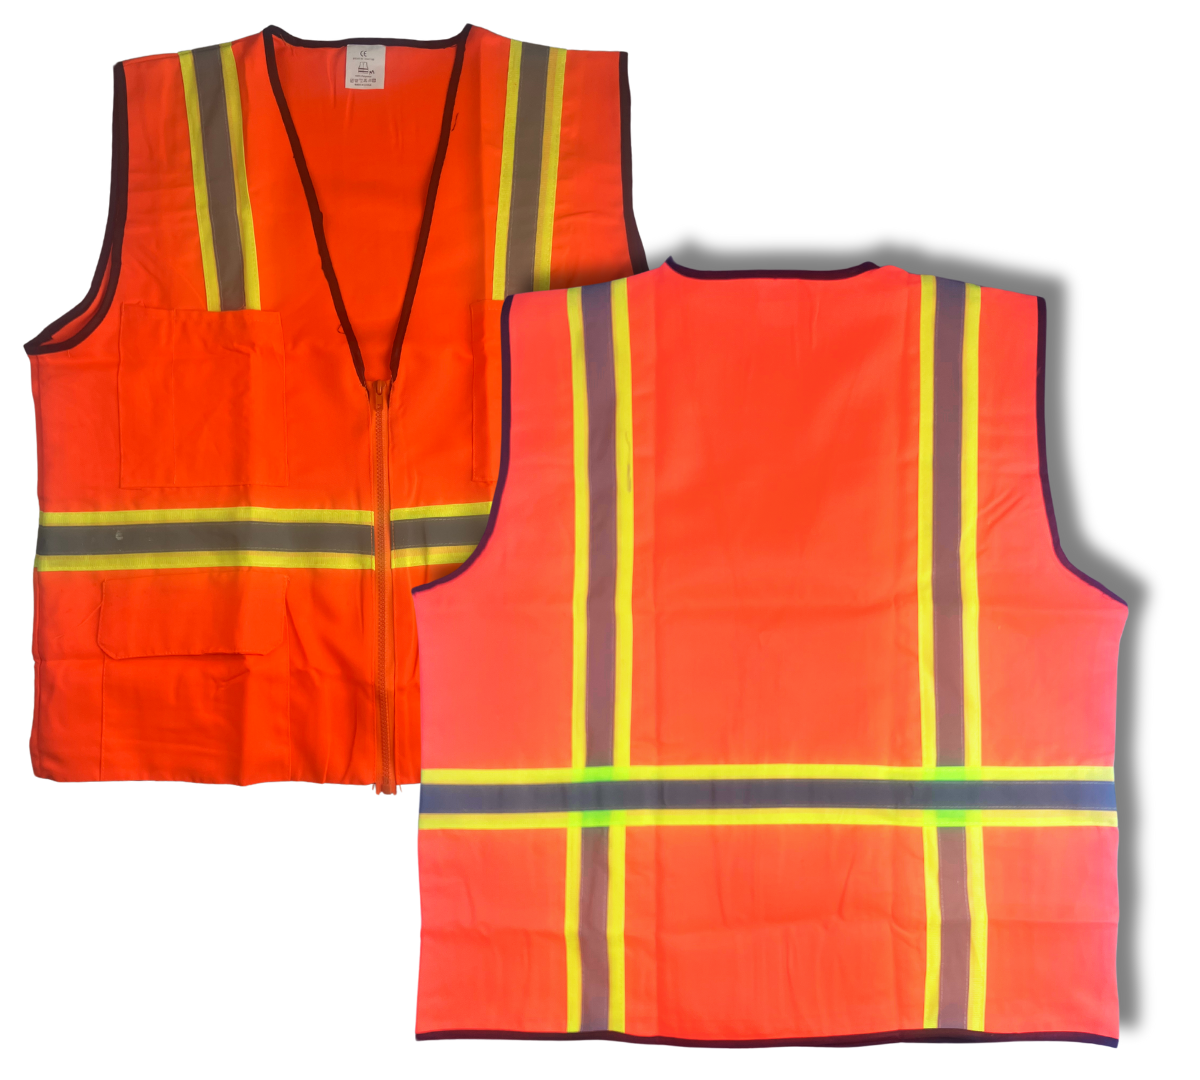 Bright Orange Safety Vest With Reflective Stripes Adult Size 6X Large  - SF-42718